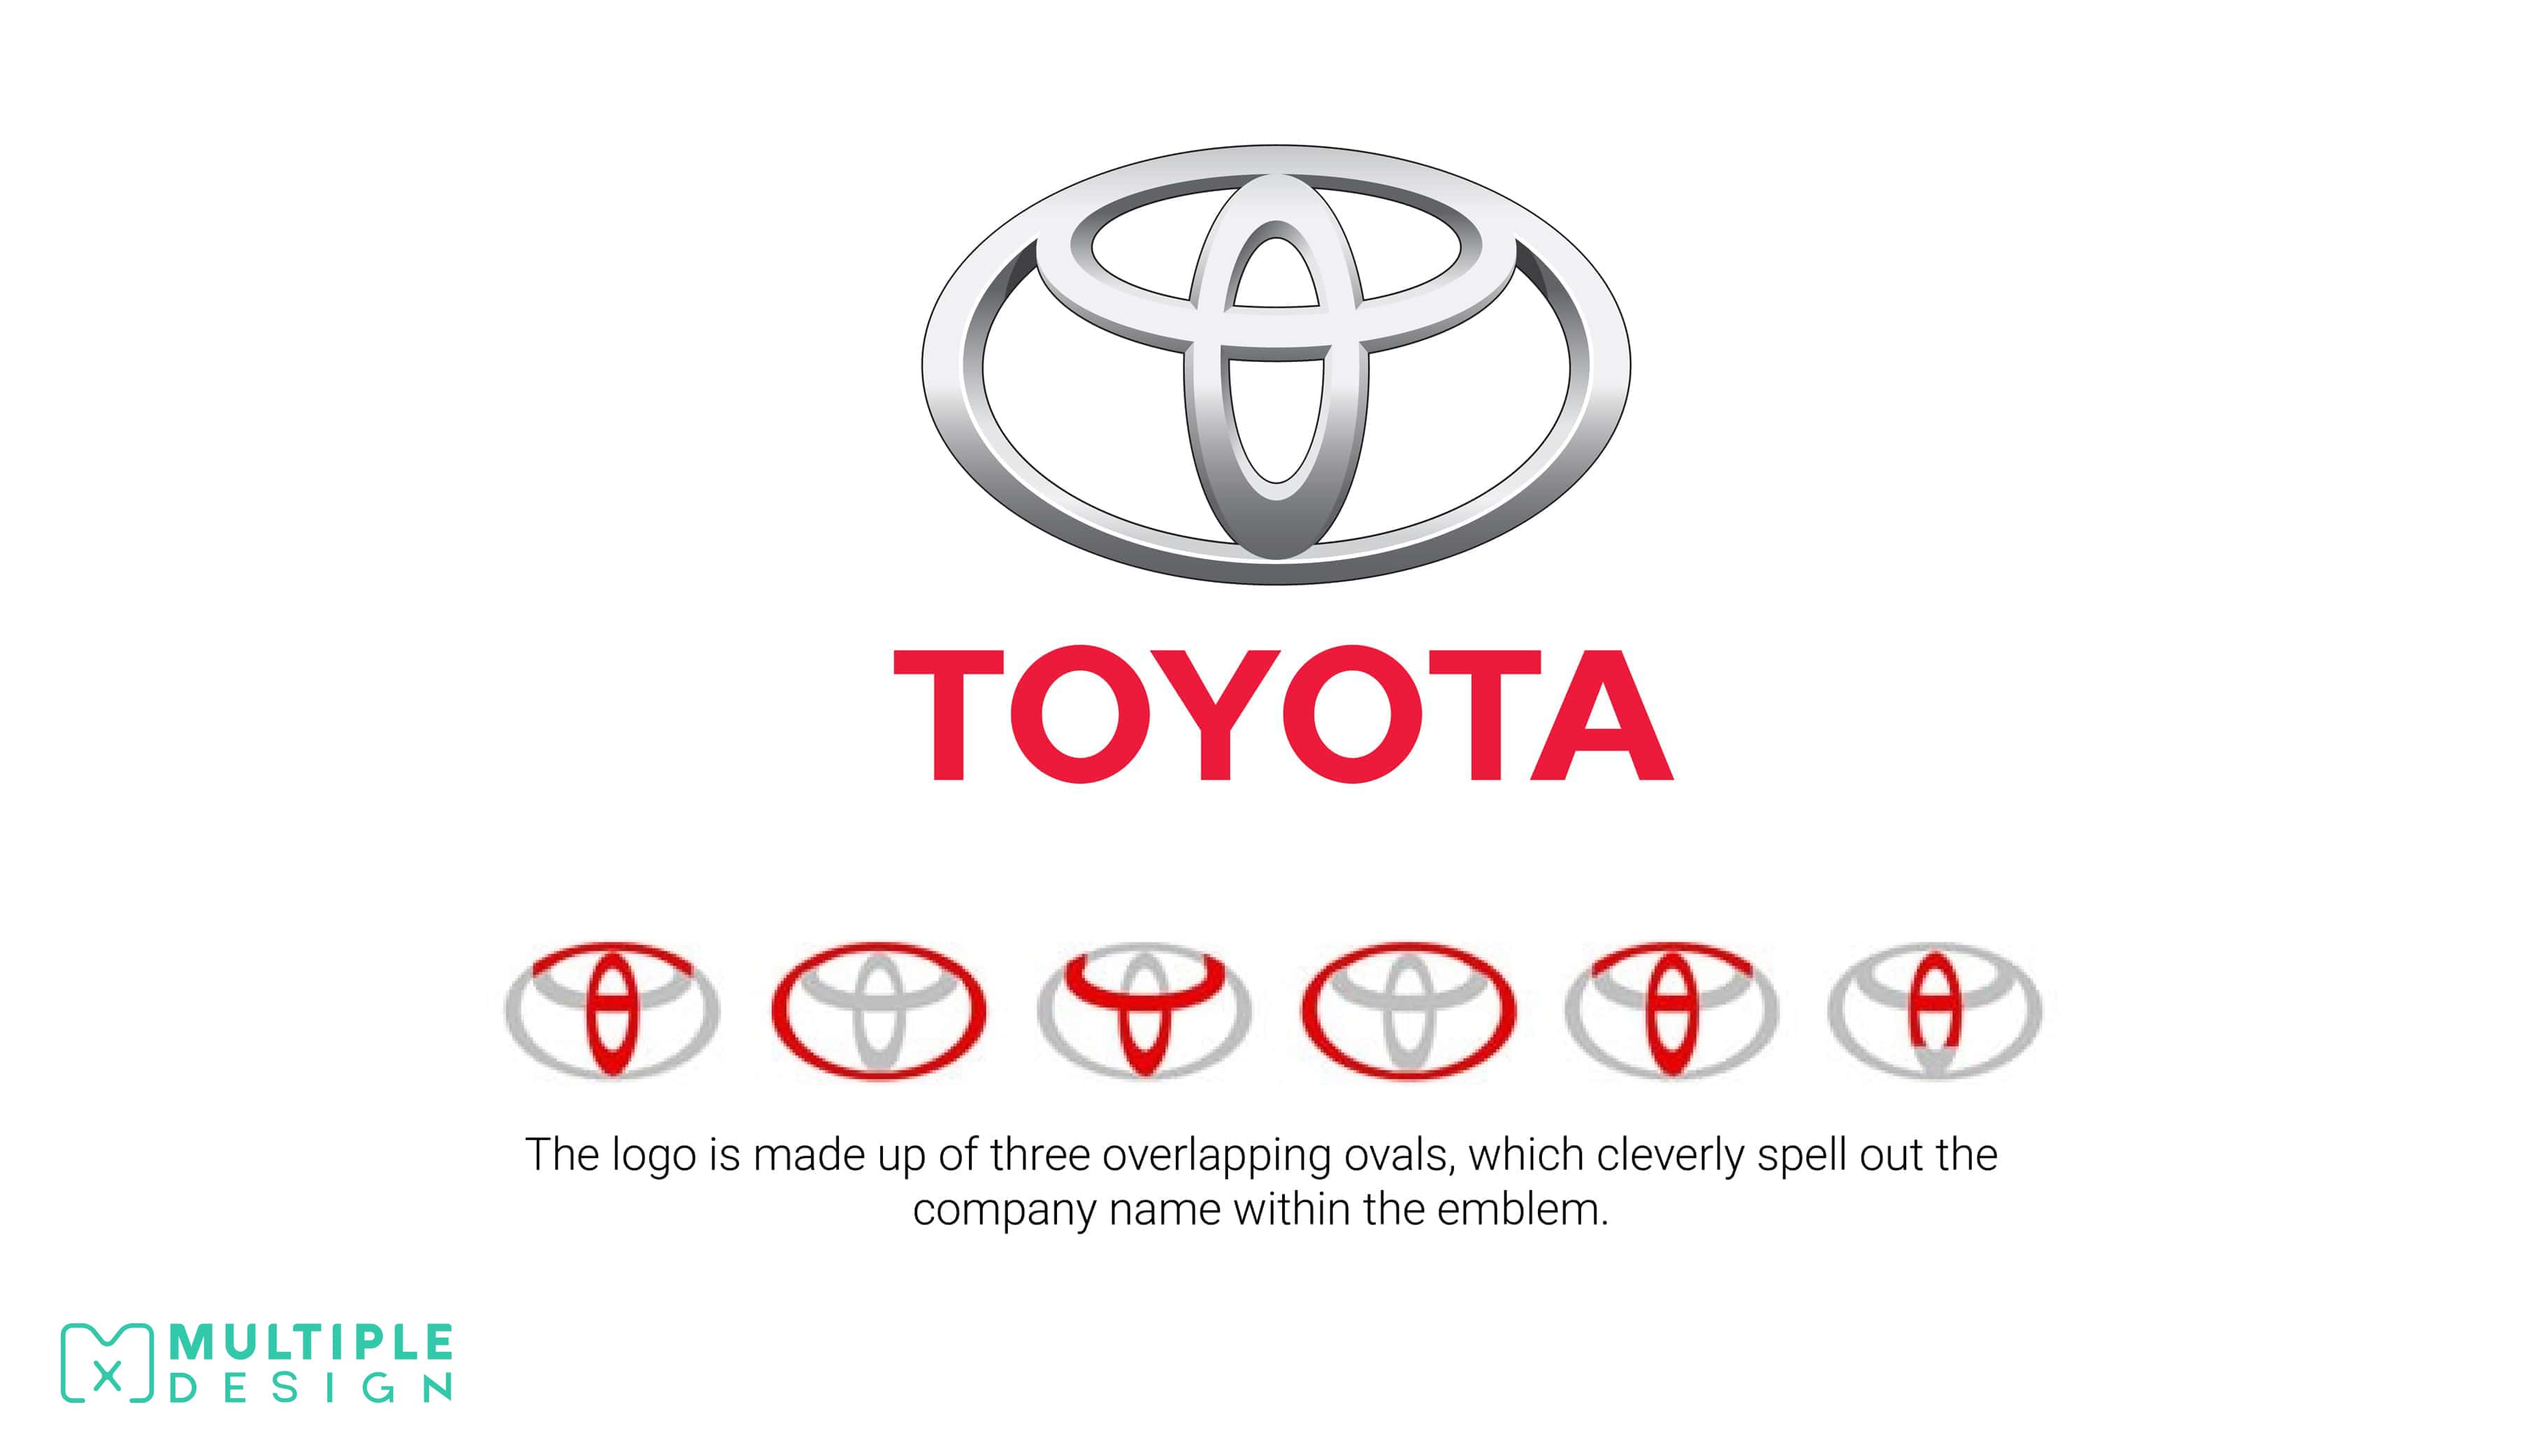 Toyota logo, spells out name